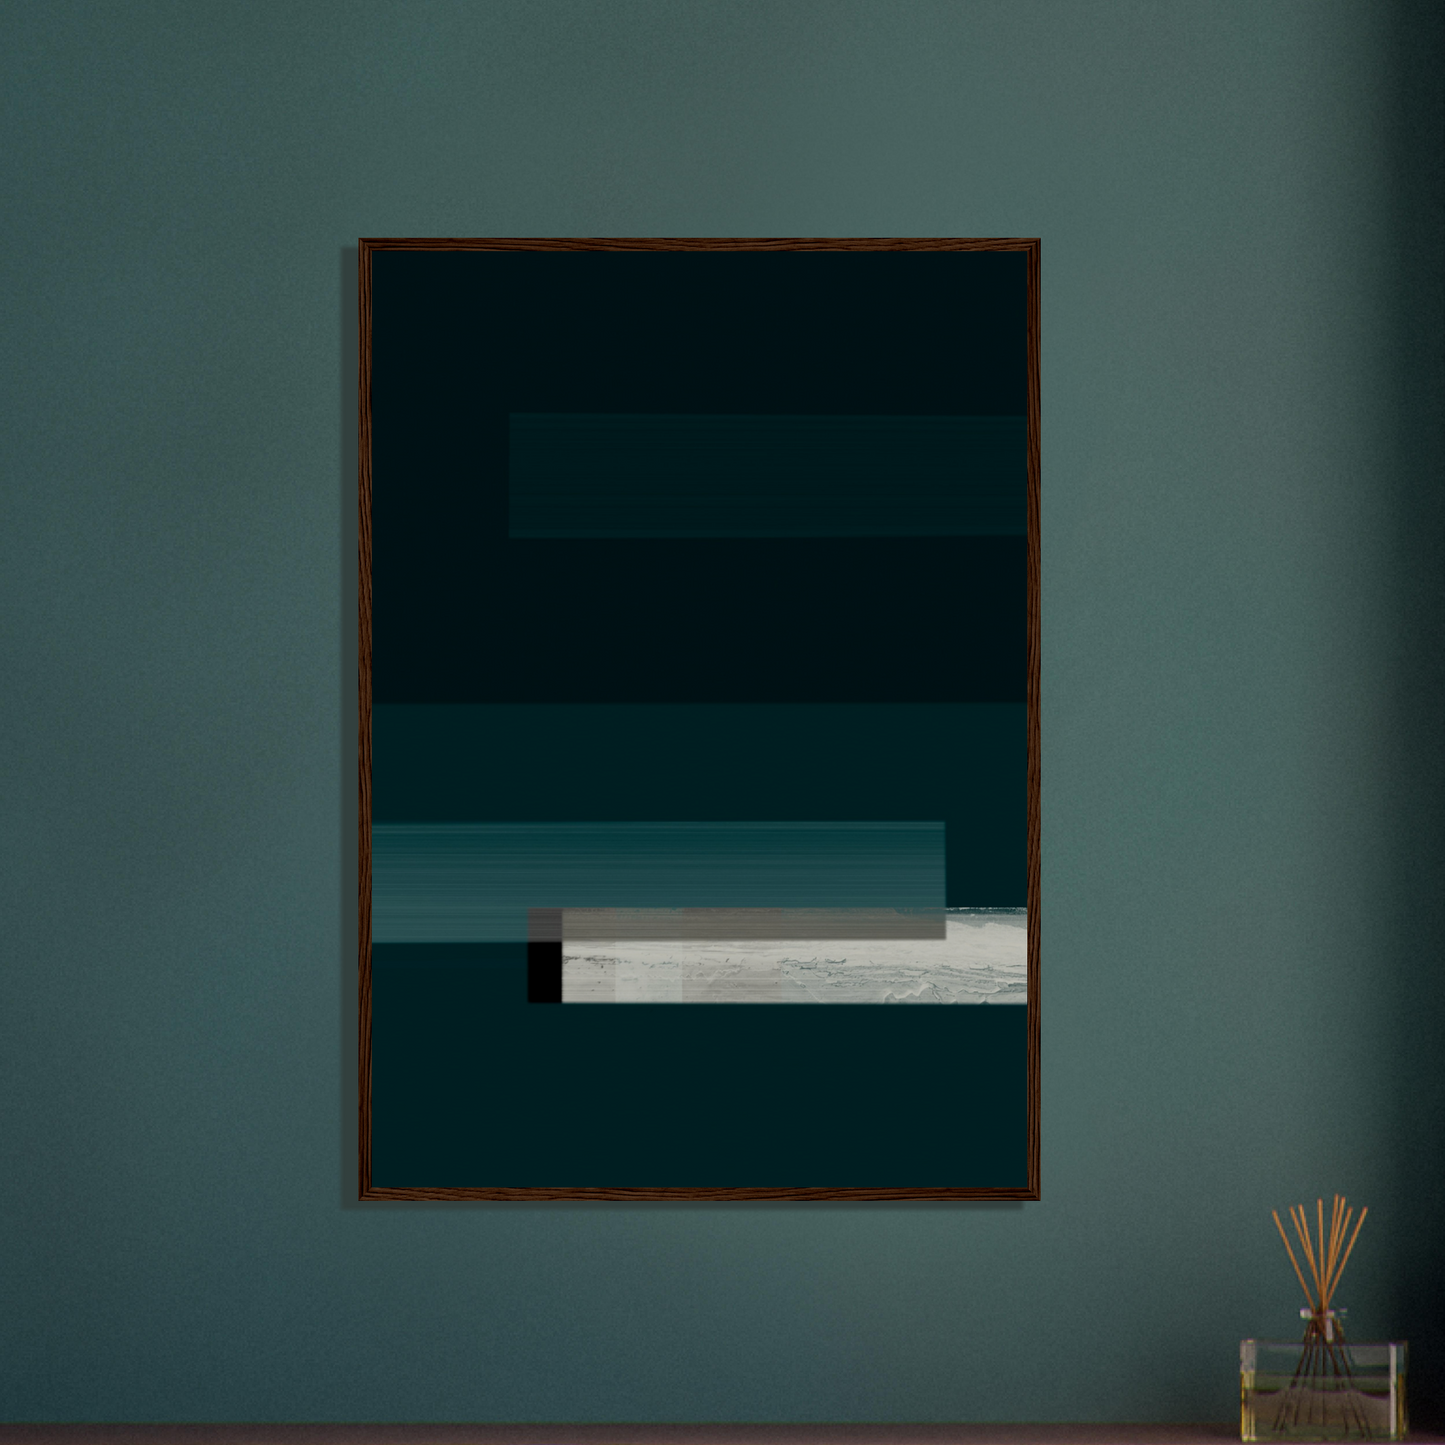 Deep Green Abstract In Dark Wood Frame (Open Edition)